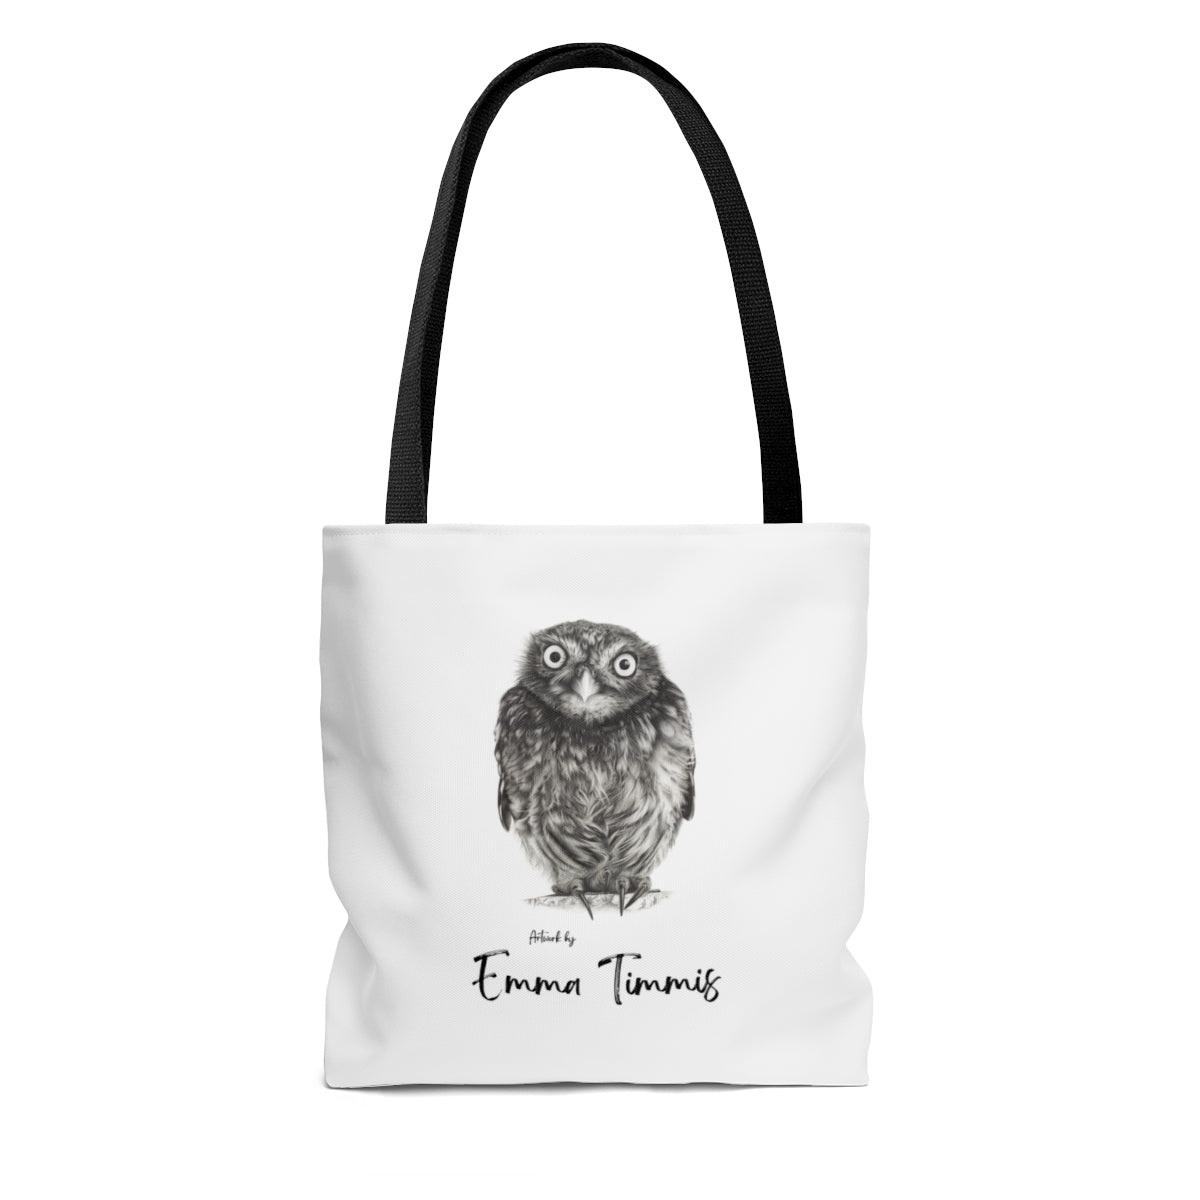 Little Owl Tote Bag with FREE SHIPPING